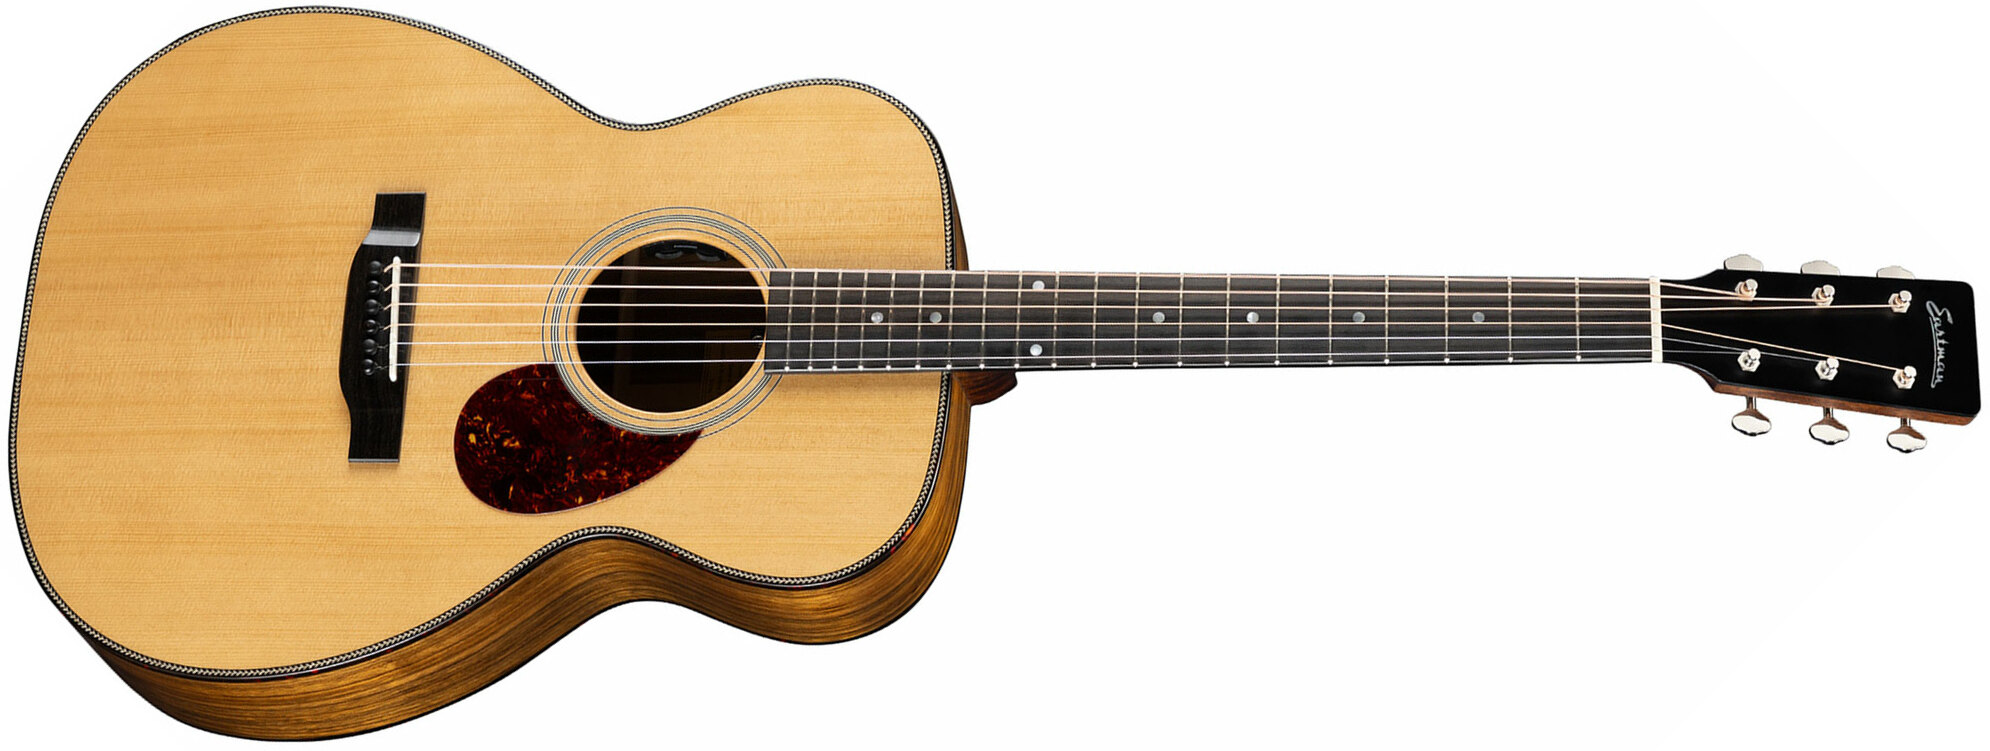 Eastman E30m Deluxe Orchestra Epicea Ovangkol Eb - Truetone Natural Gloss - Acoustic guitar & electro - Main picture